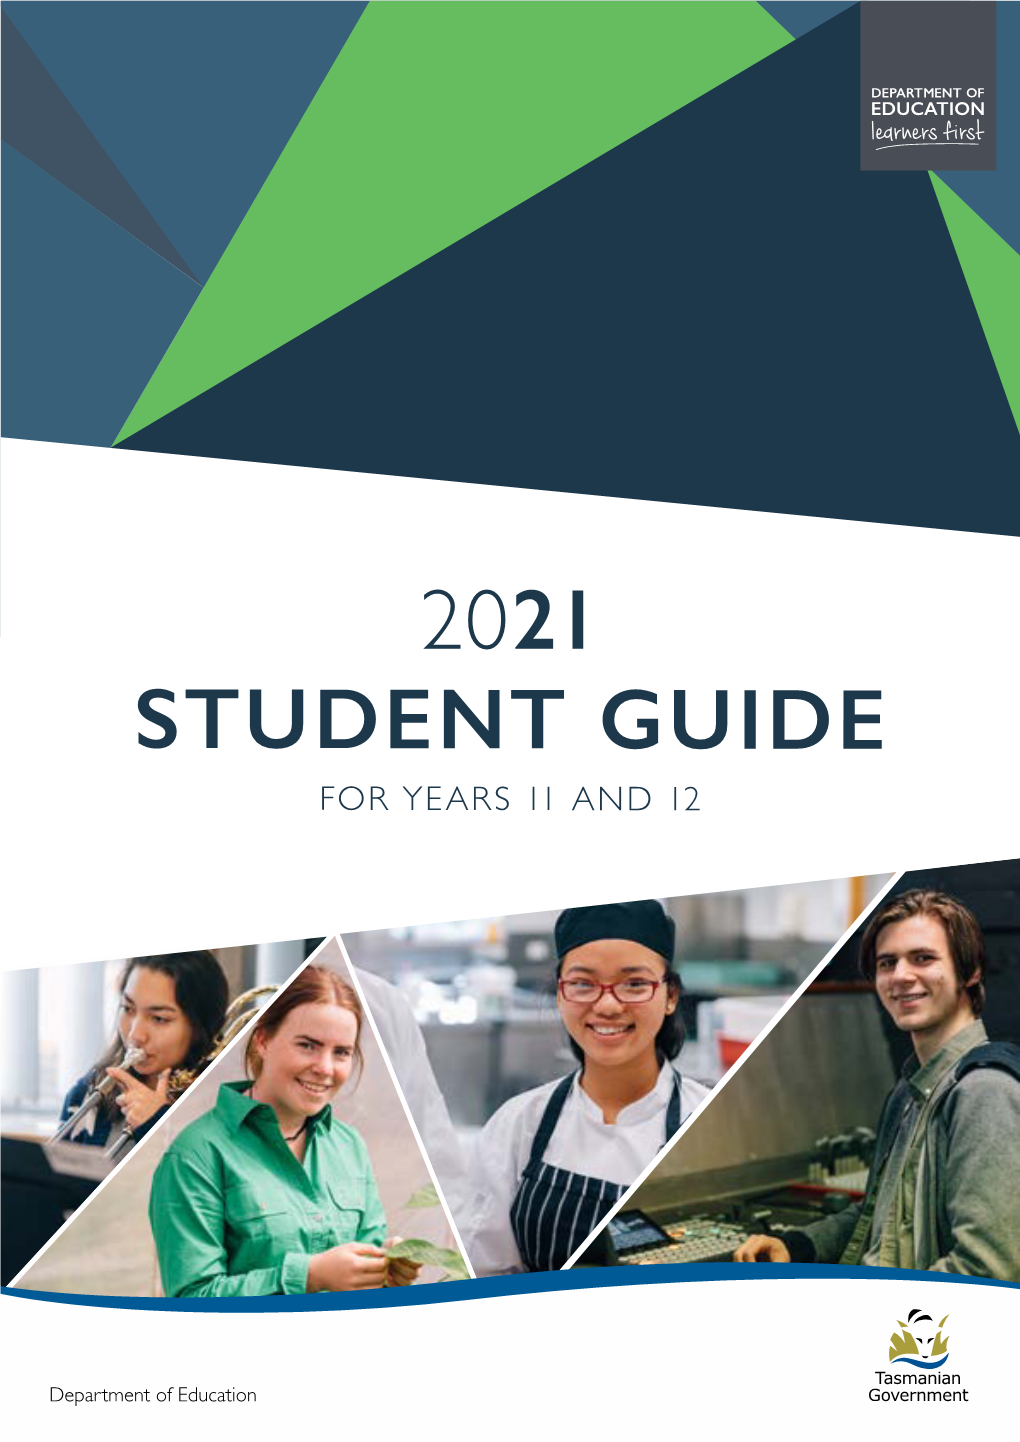 2021 Student Guide for Years 11 and 12